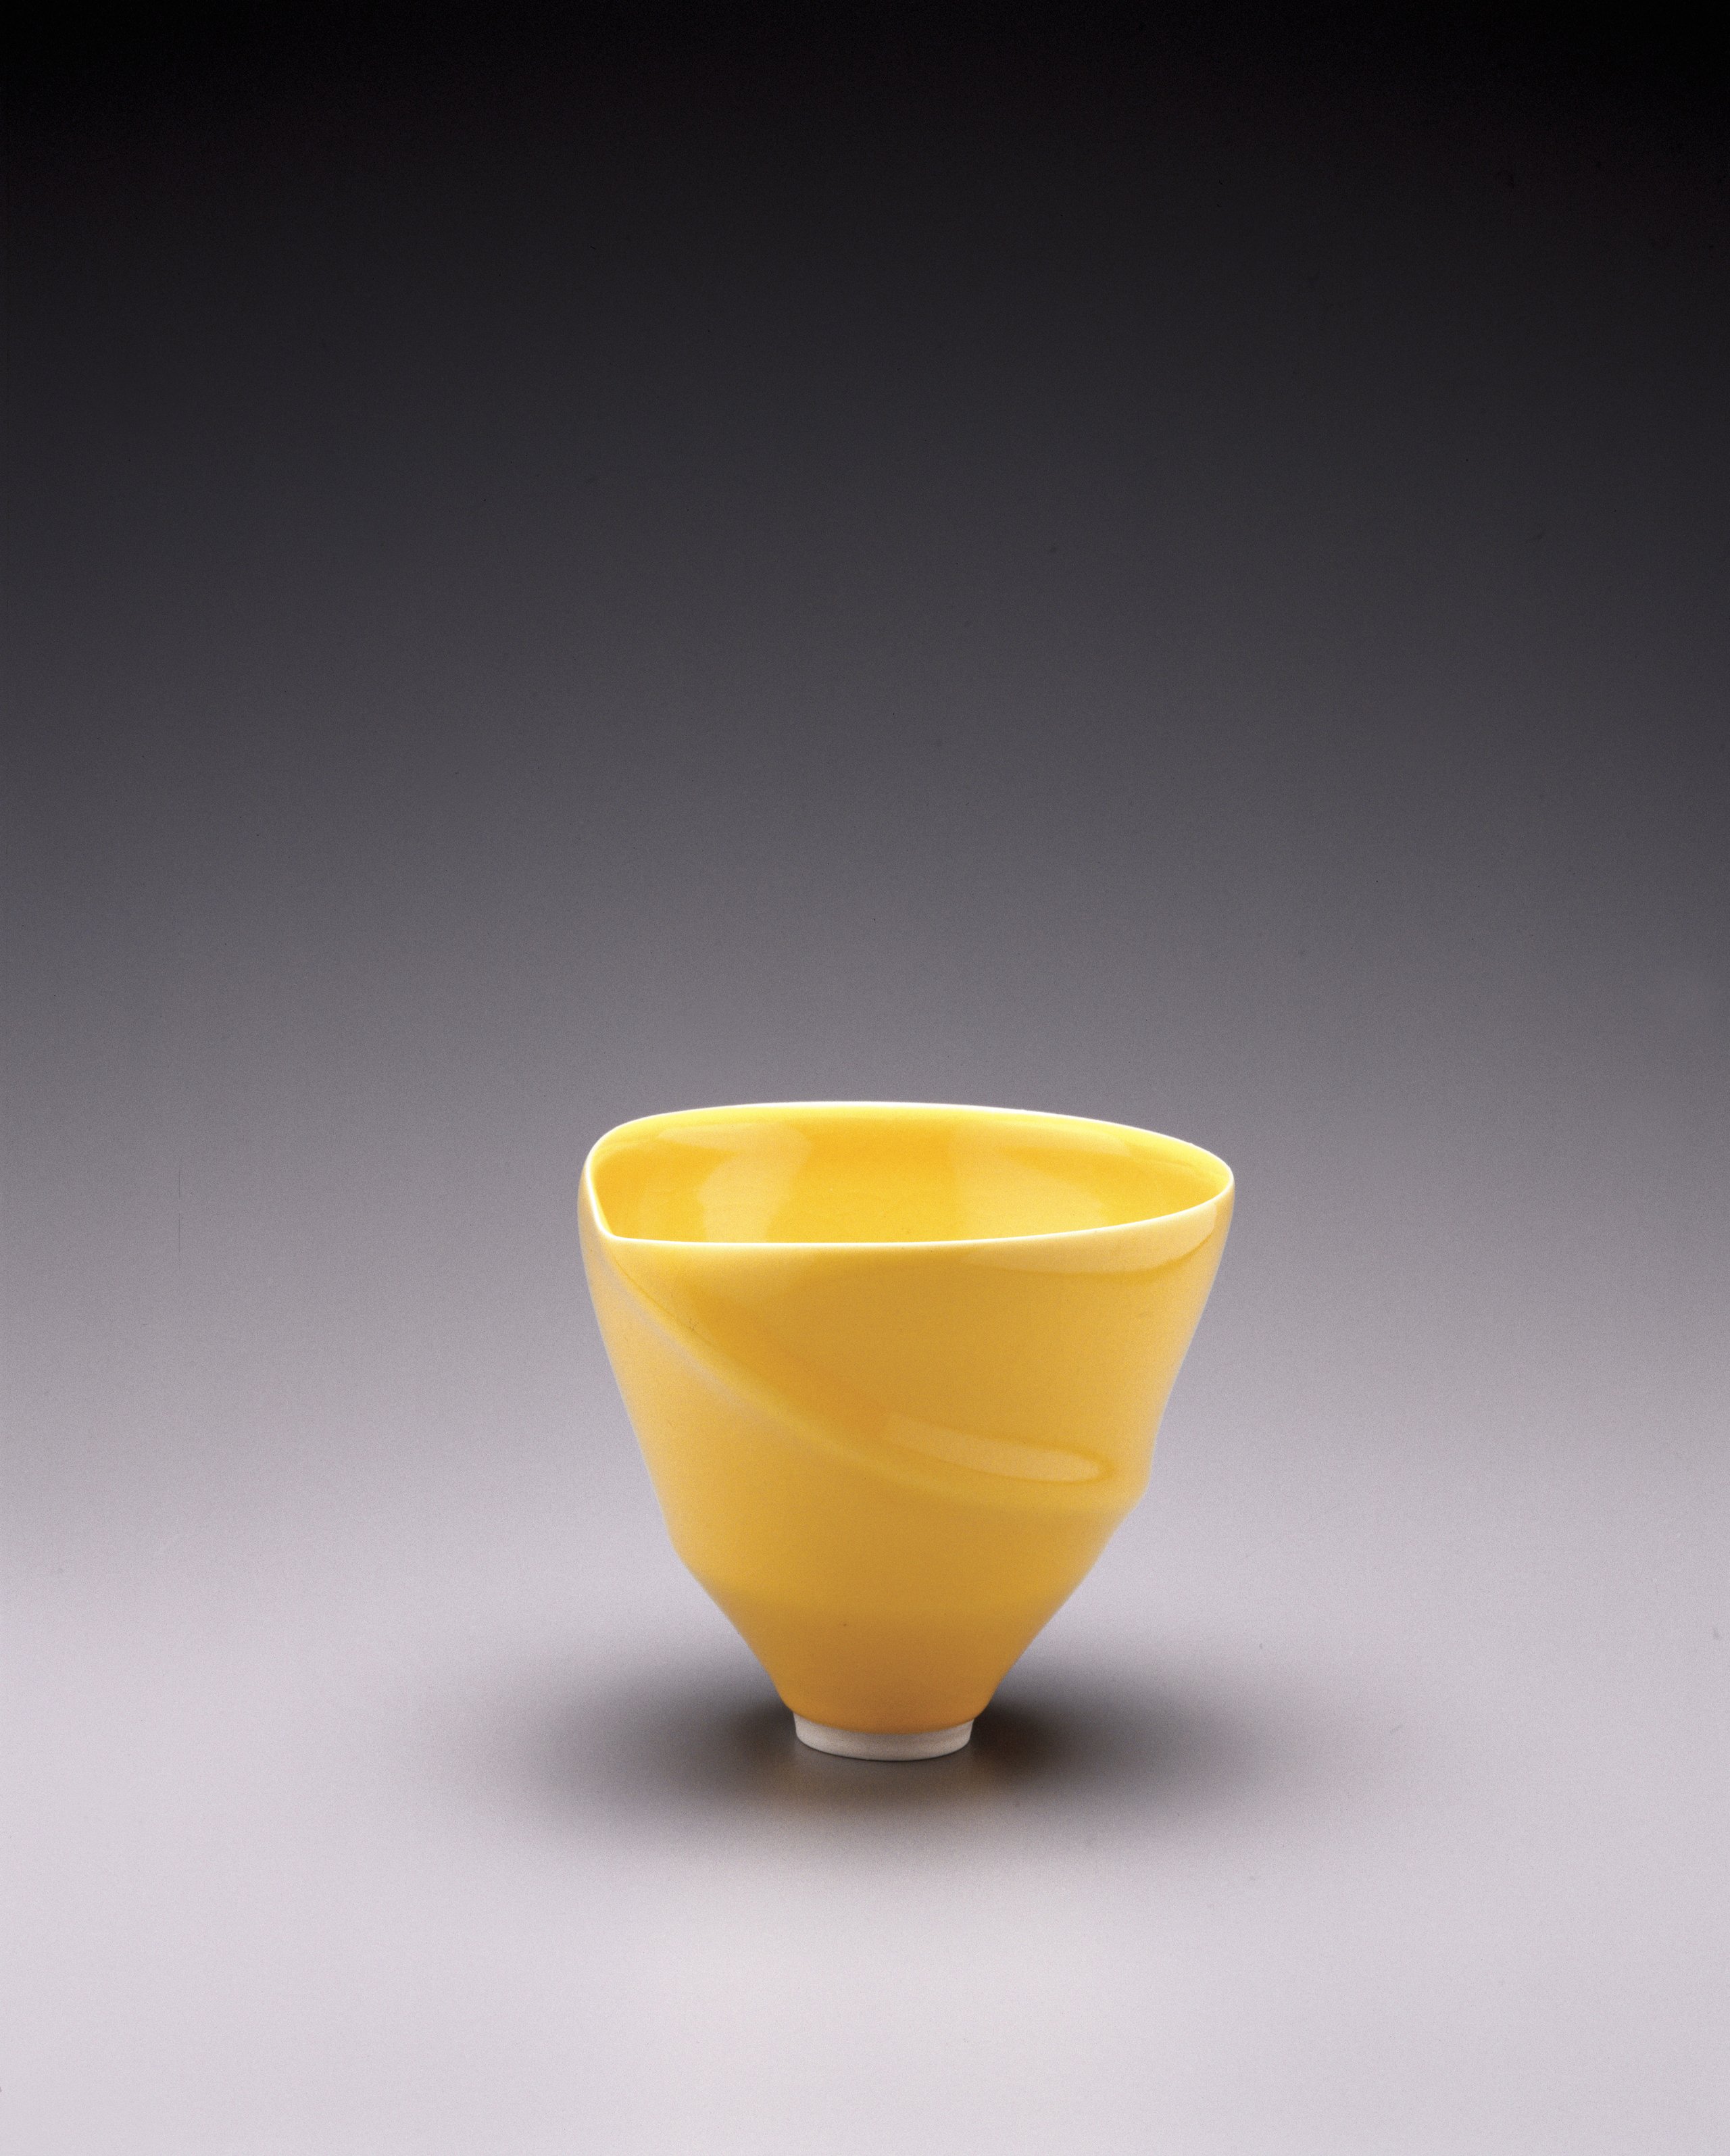 'Spiral lipped bowl' by Victor Greenaway